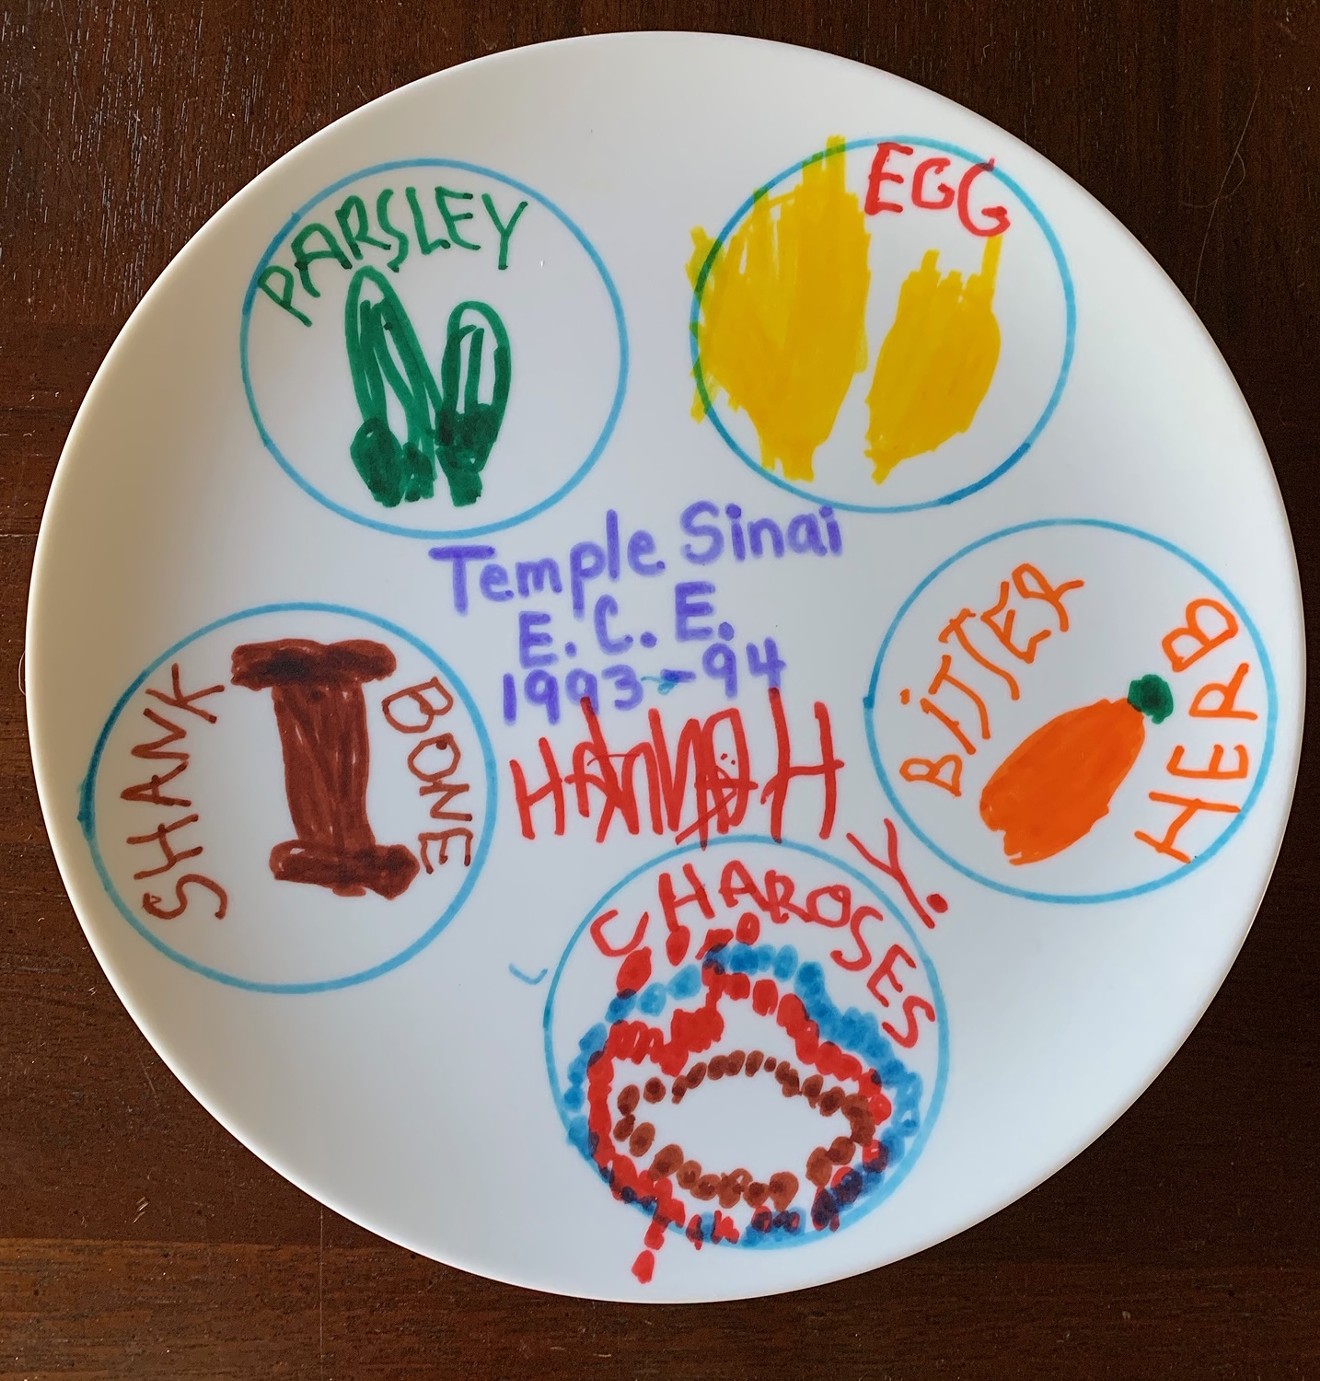 A seder plate made at the Temple Sinai preschool in 1994.